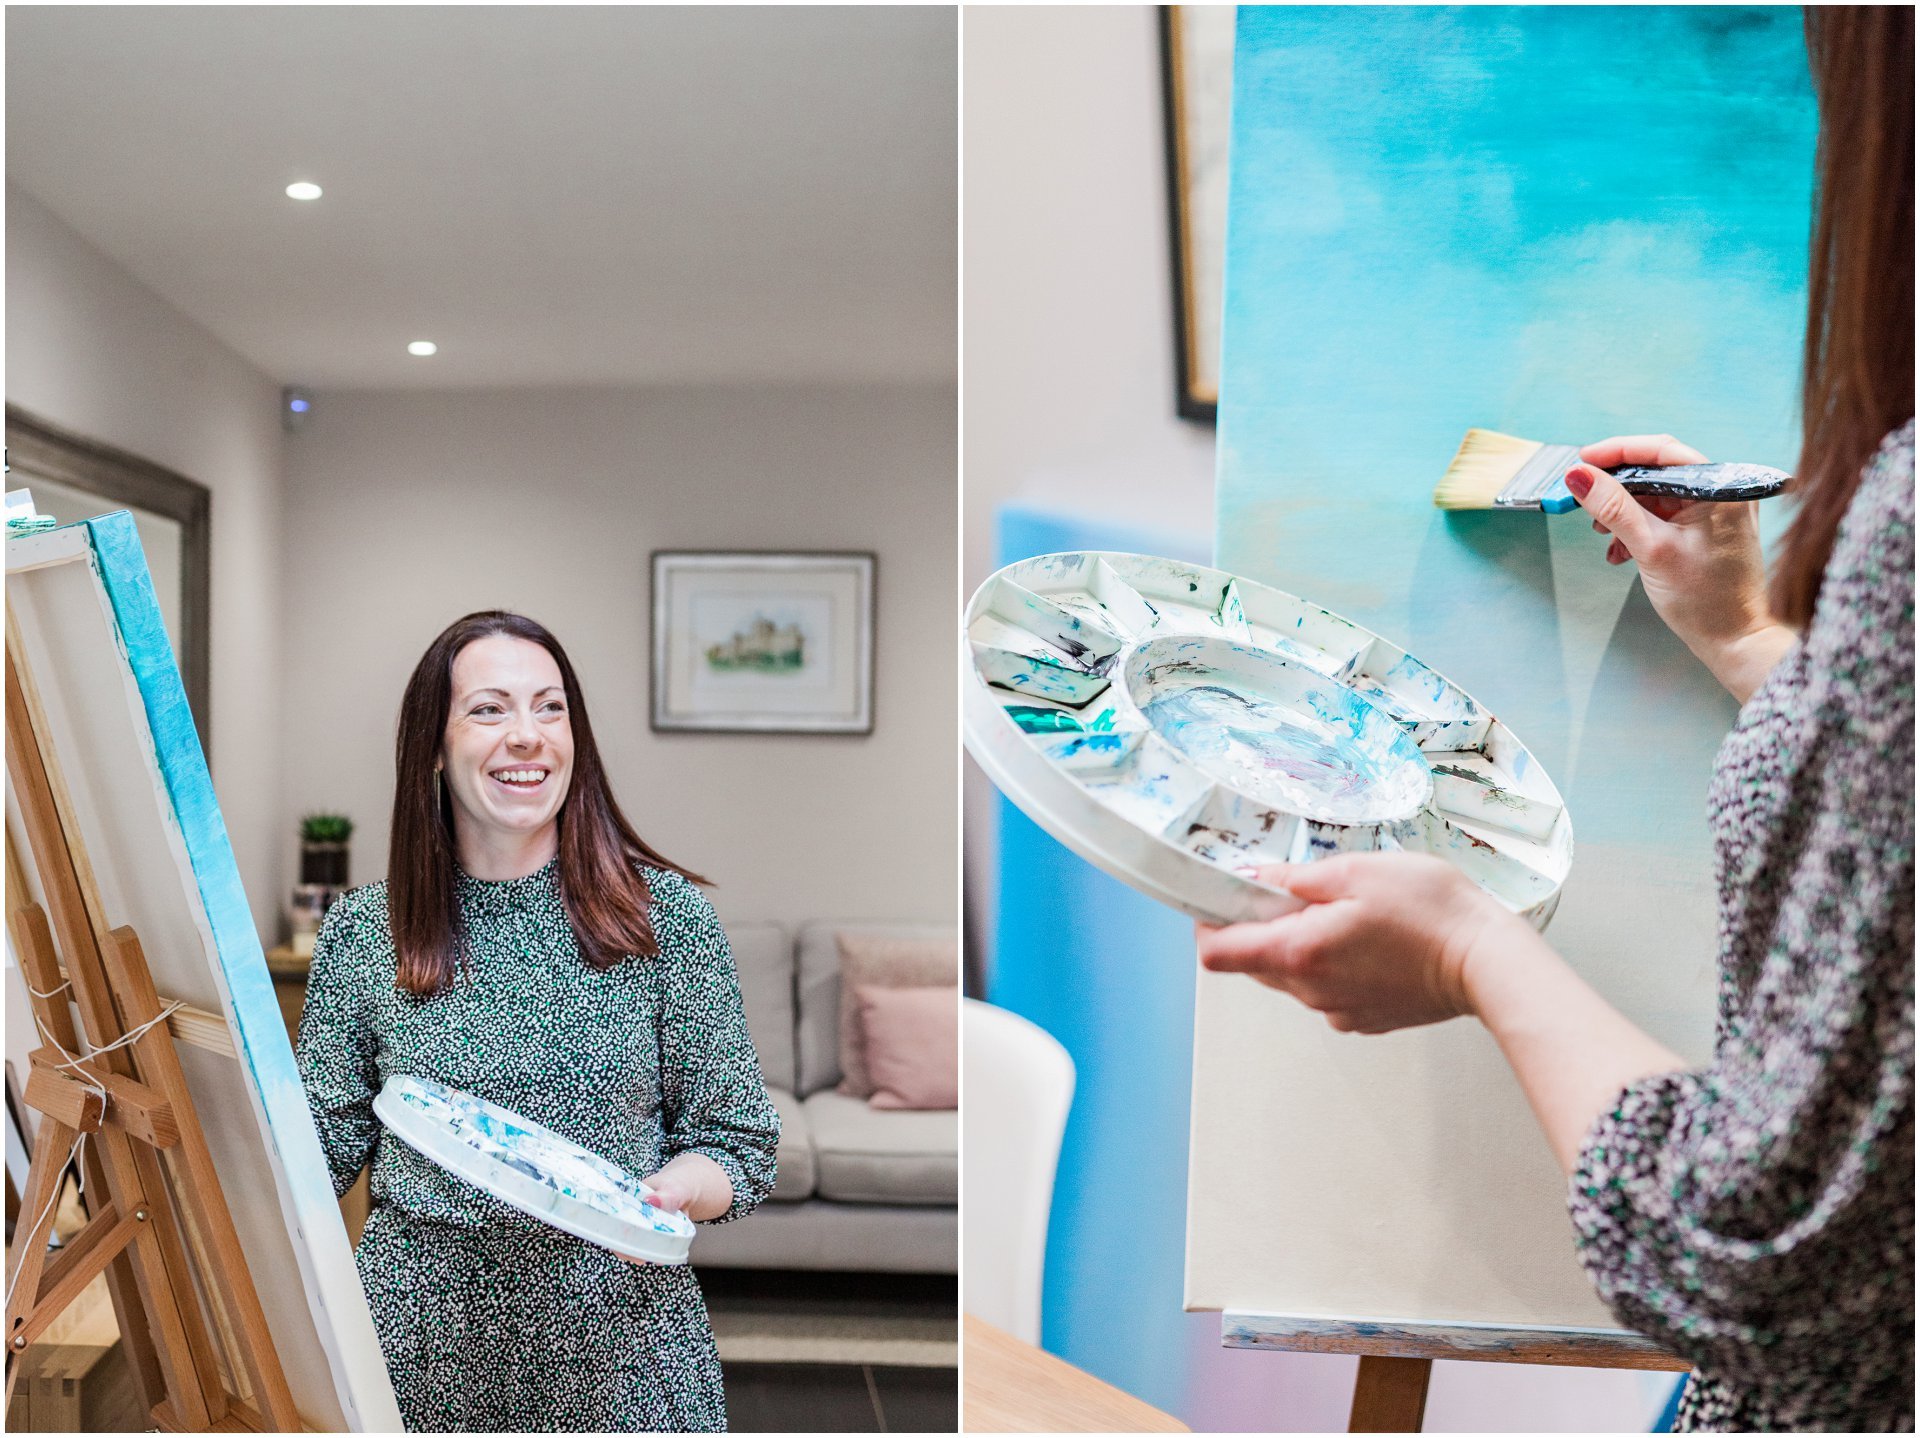 Personal brand shoot showing the creative artist of business consultant Katherine Allan. Images by London branding photographer AKP Branding Stories